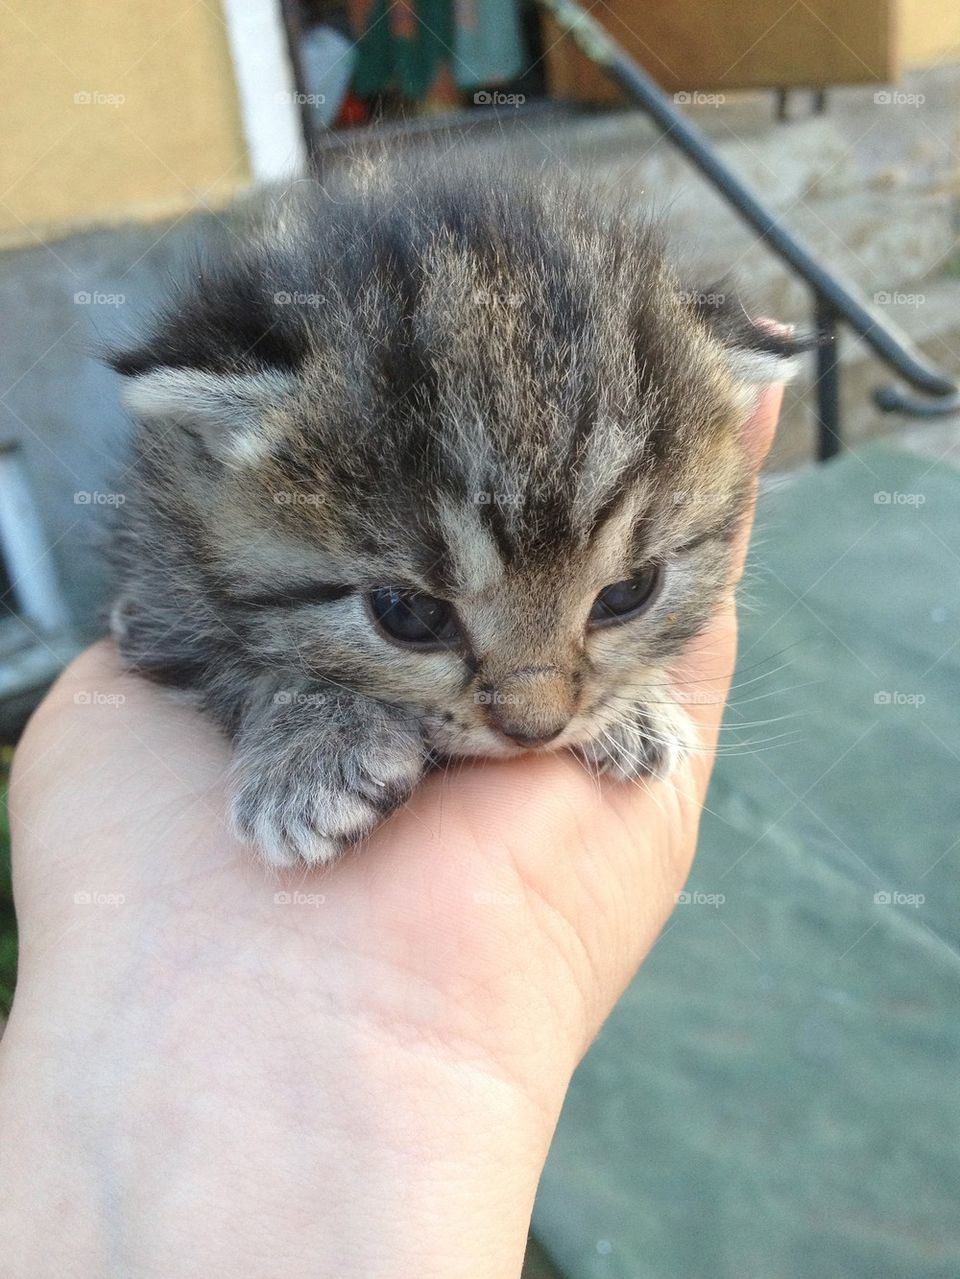 Little Kitty of ours